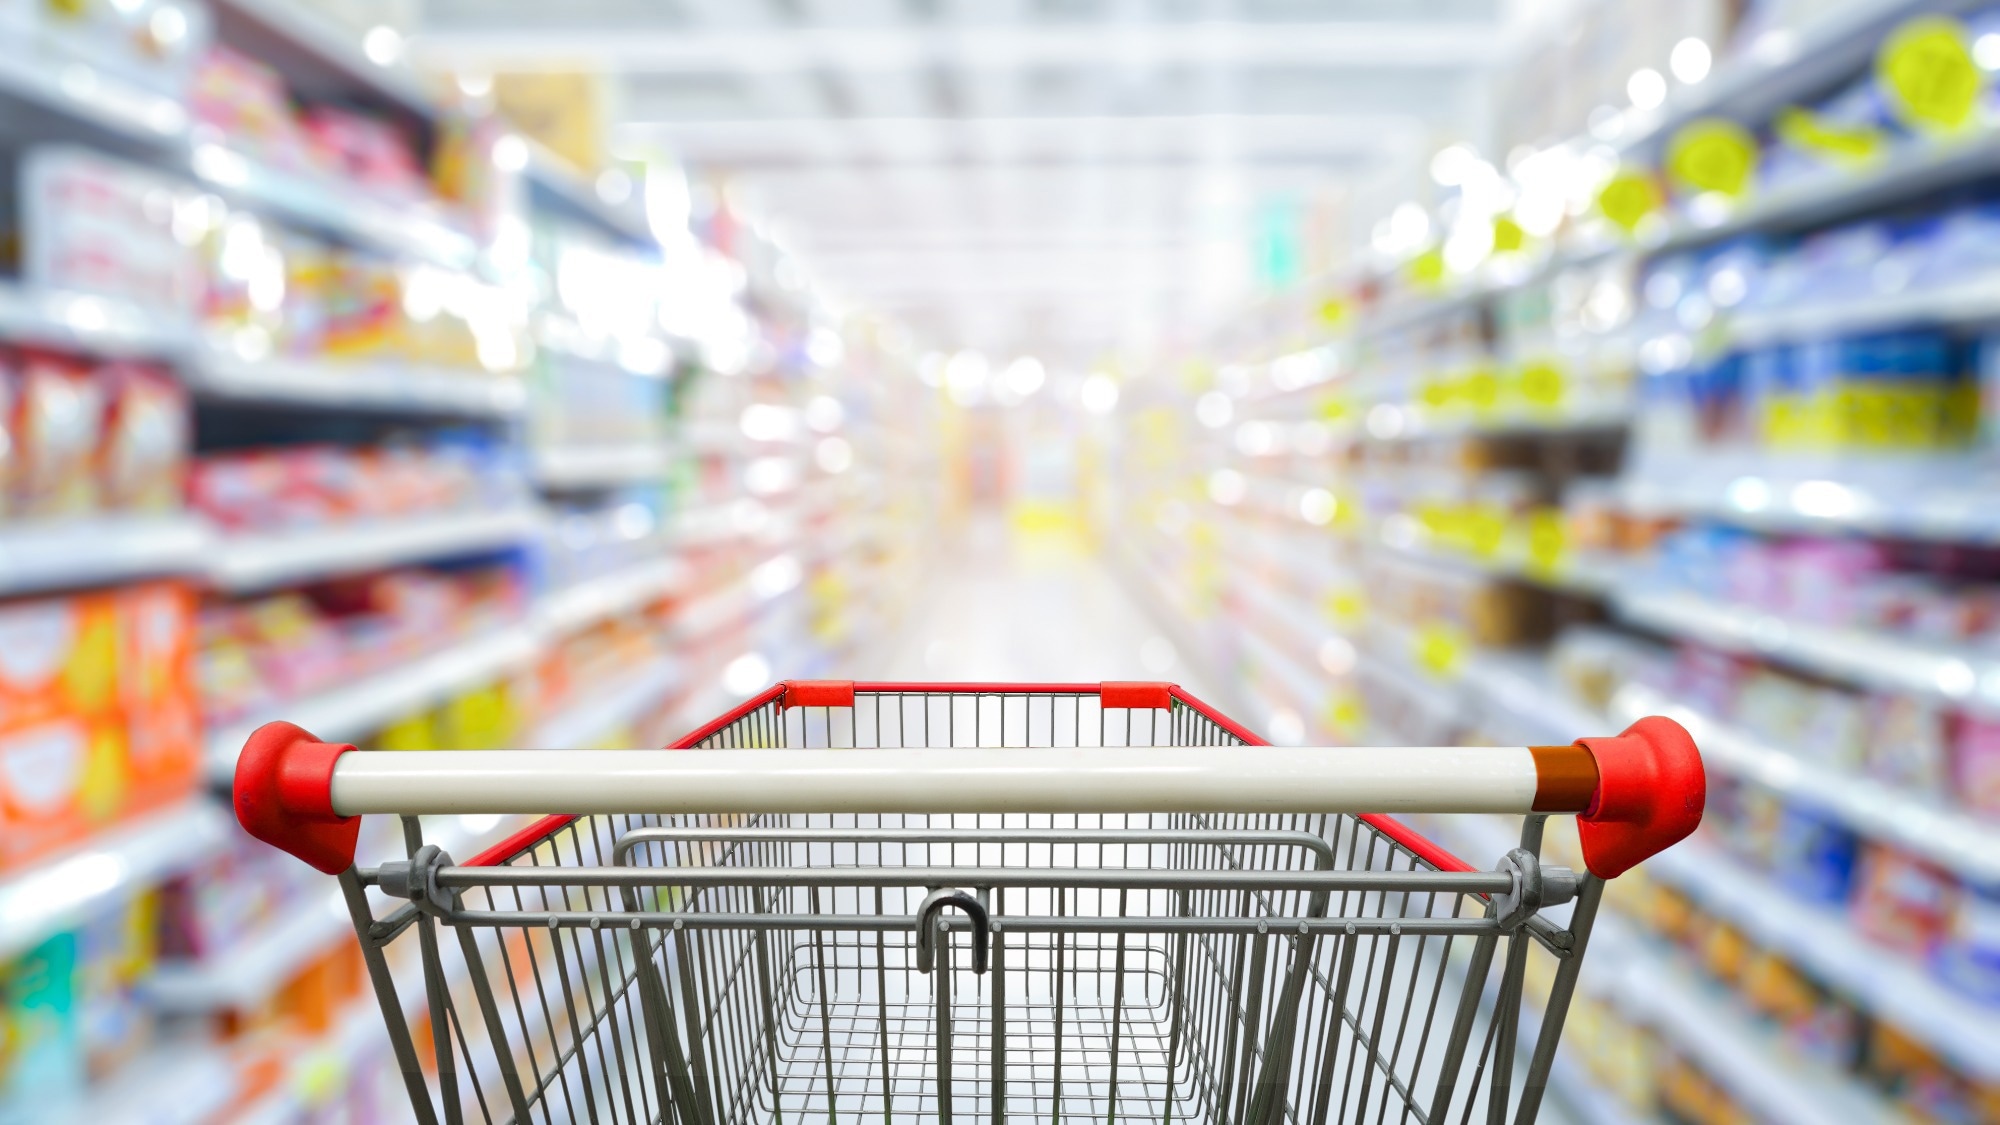 Study: Priming shoppers’ well-being goal in grocery stores: Moving toward healthier food choices? Image Credit: nonc/Shutterstock.com